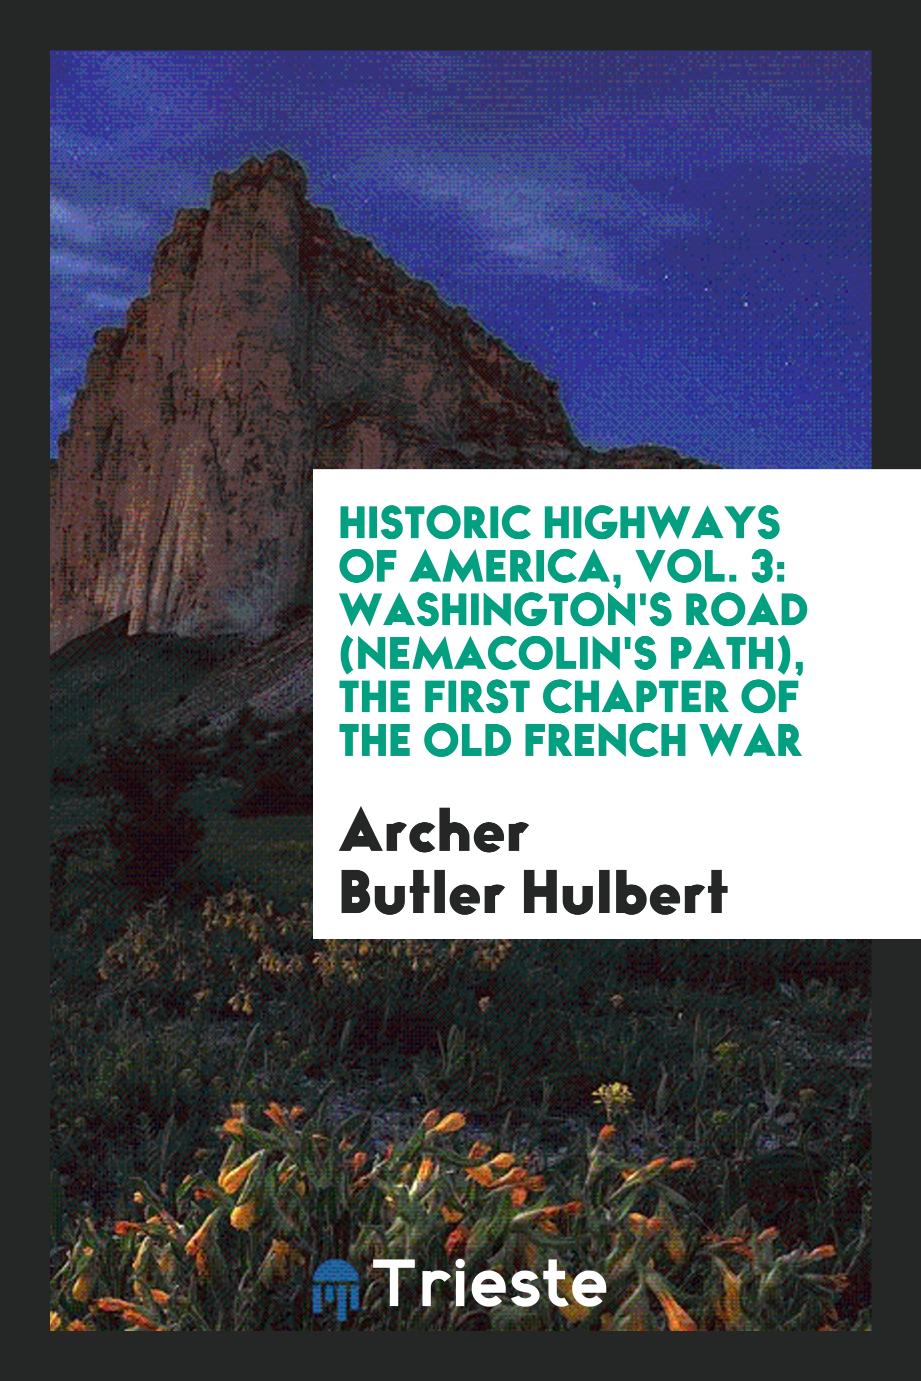 Historic Highways of America, Vol. 3: Washington's Road (Nemacolin's Path), the First Chapter of the Old French War